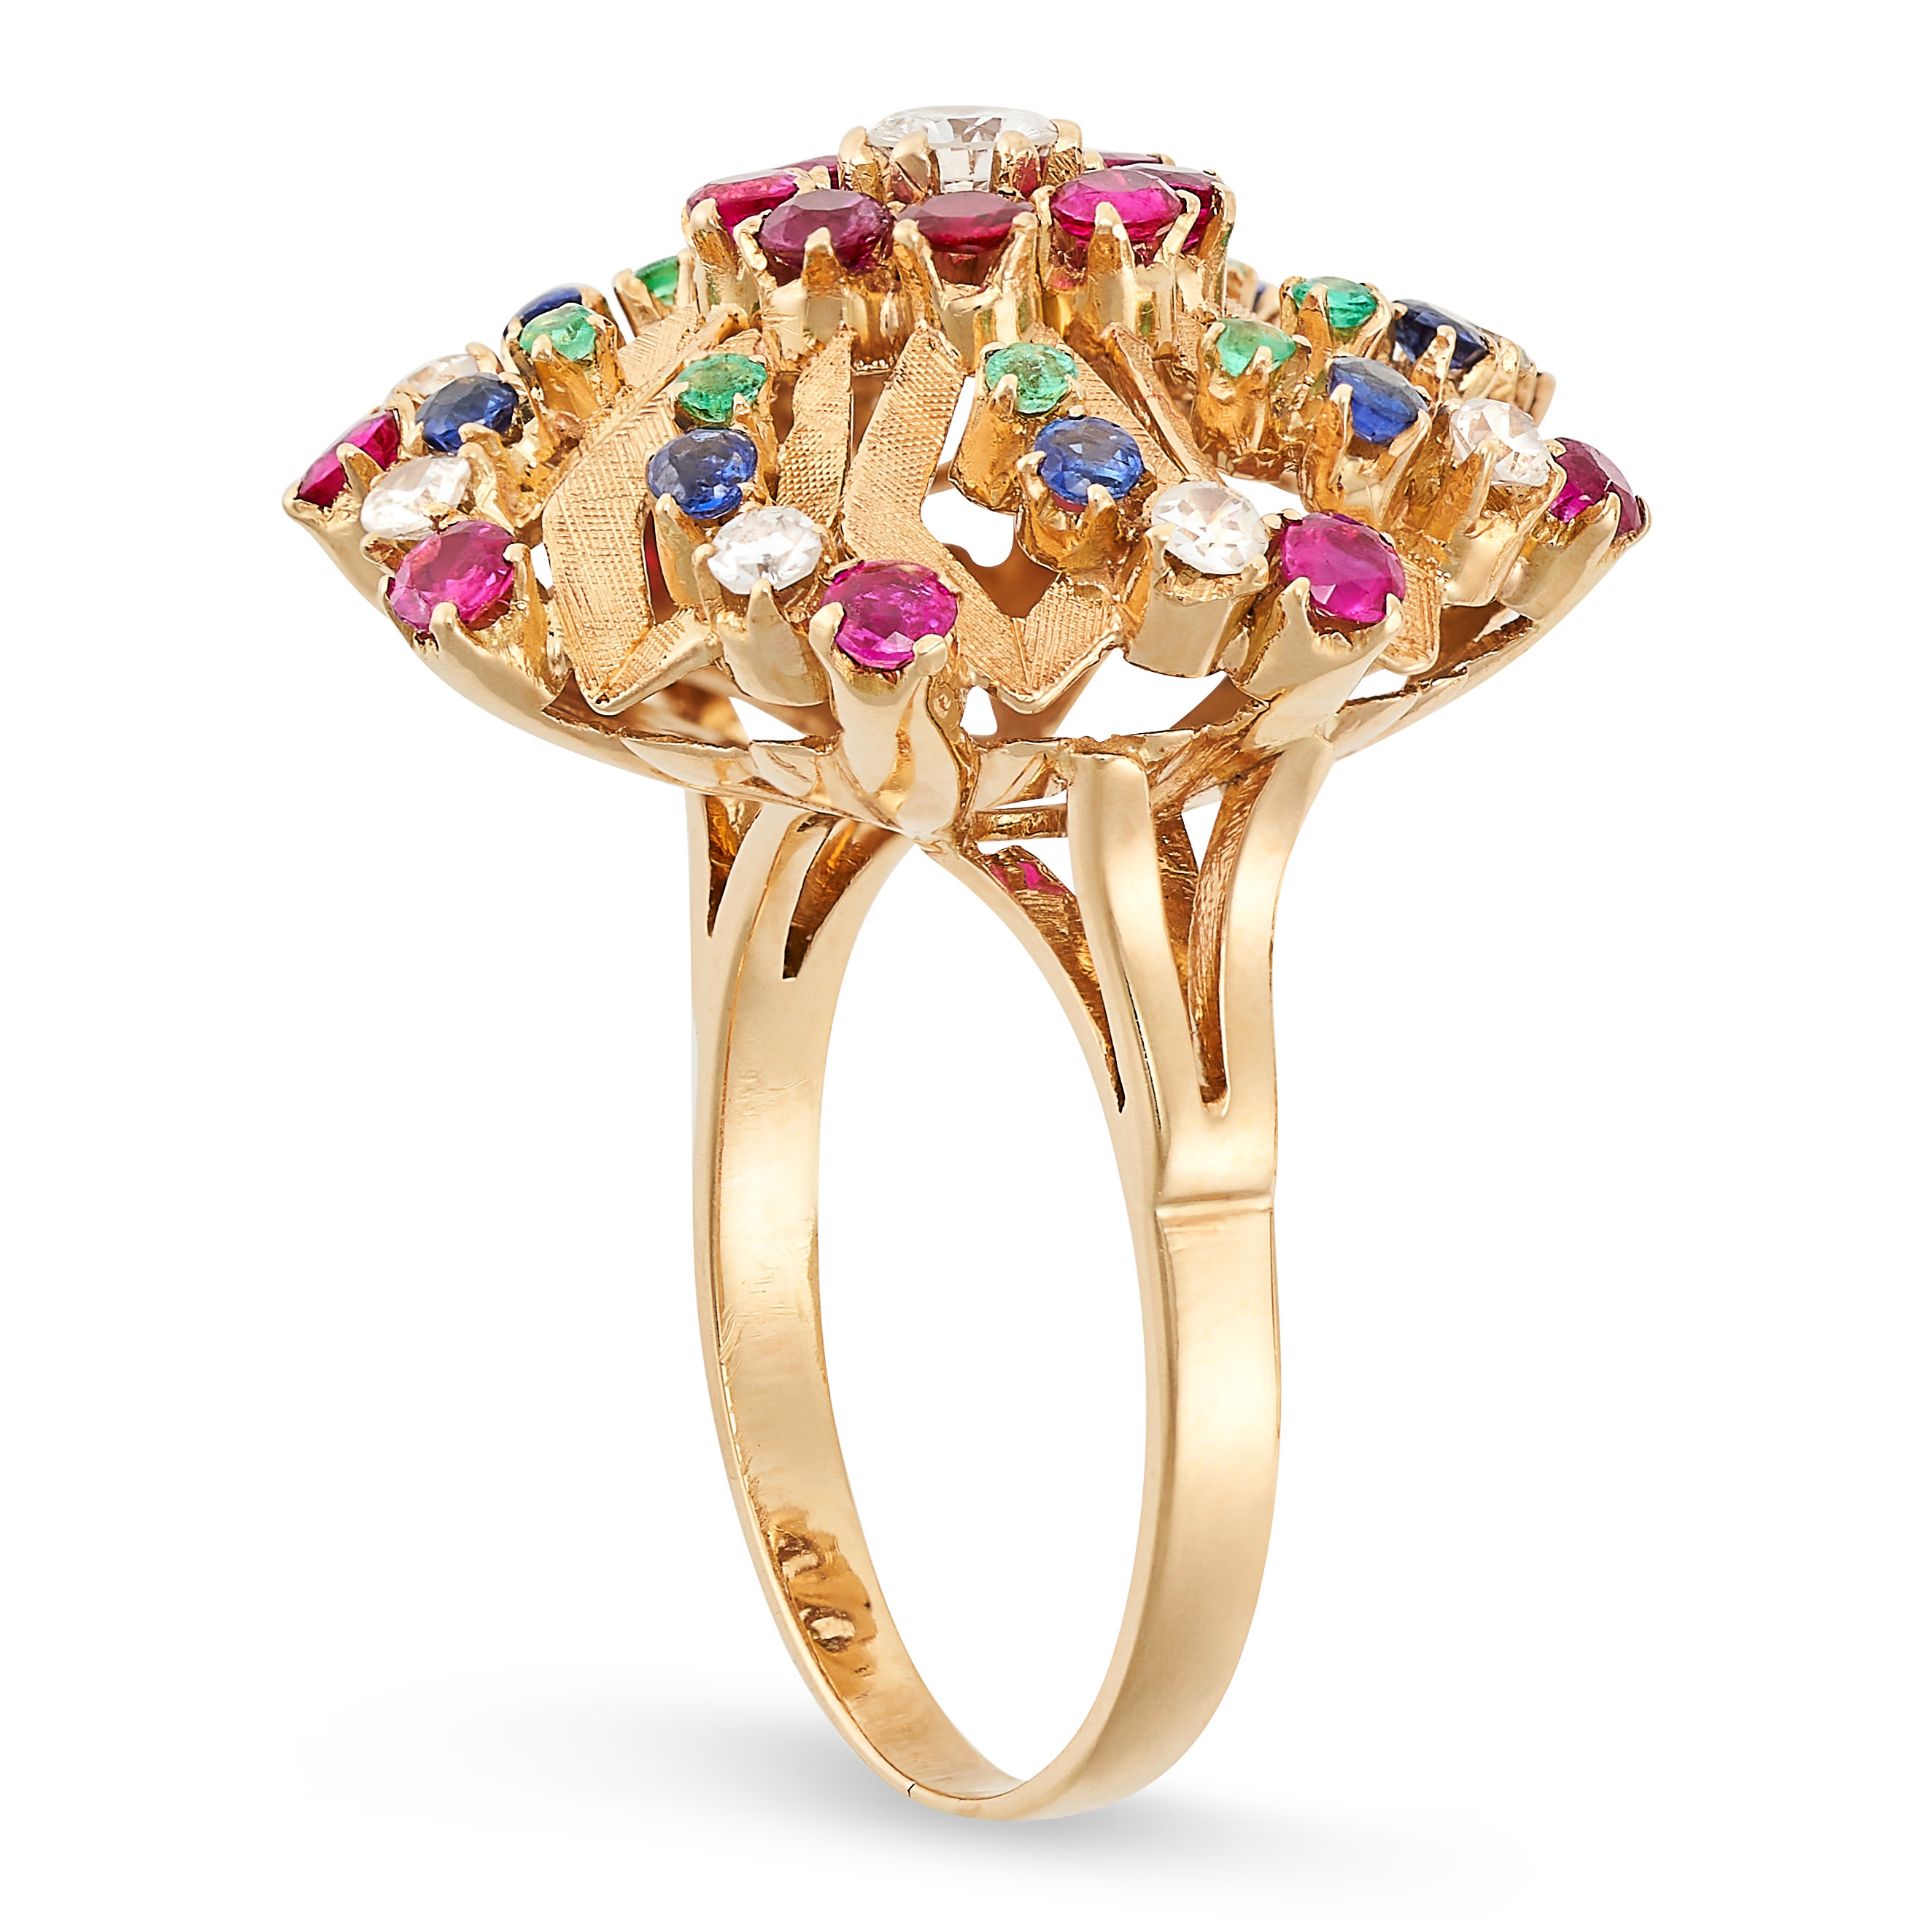 A VINTAGE DIAMOND, RUBY, SAPPHIRE AND EMERALD COCKTAIL RING in 18ct yellow gold, designed as a - Image 2 of 2